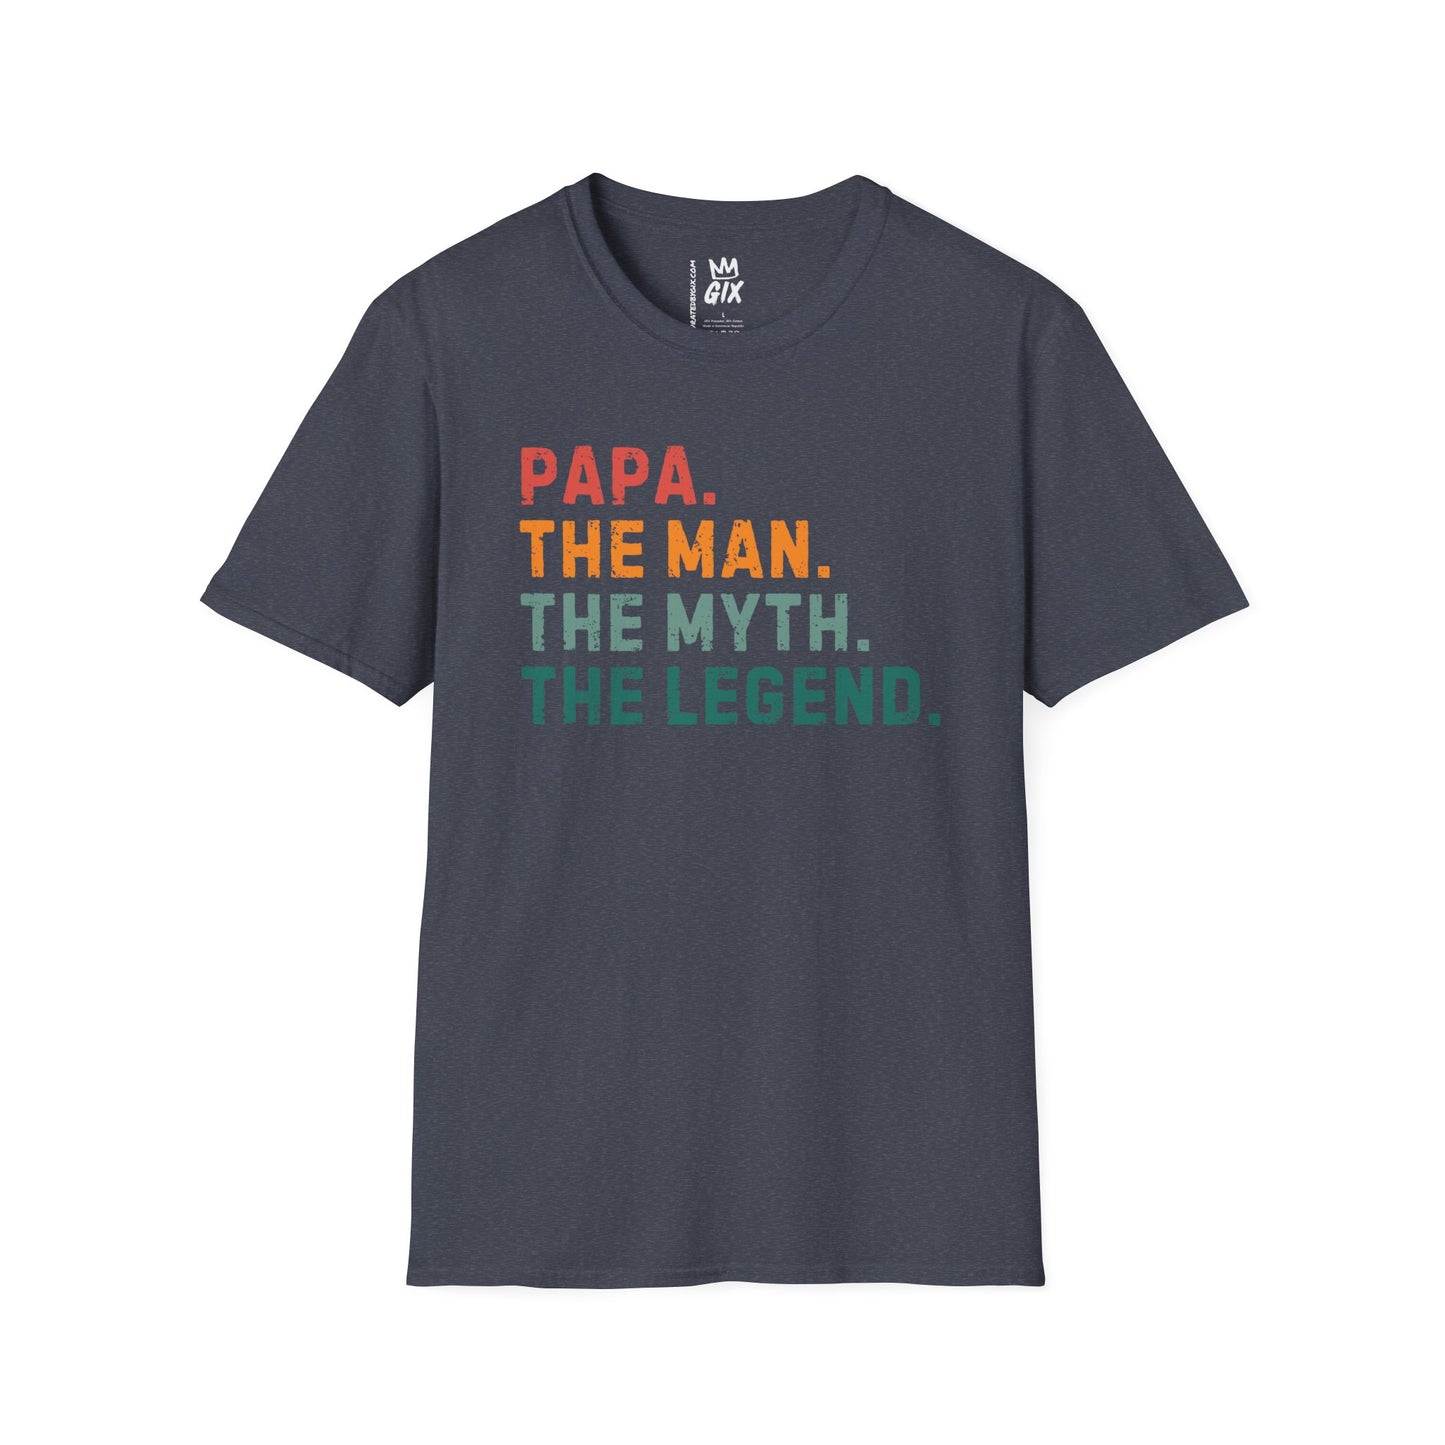 Papa. The Man. The Myth. The Legend. Heather T-Shirt - Ultra-Soft Cotton-Poly Blend, Unisex Classic Fit